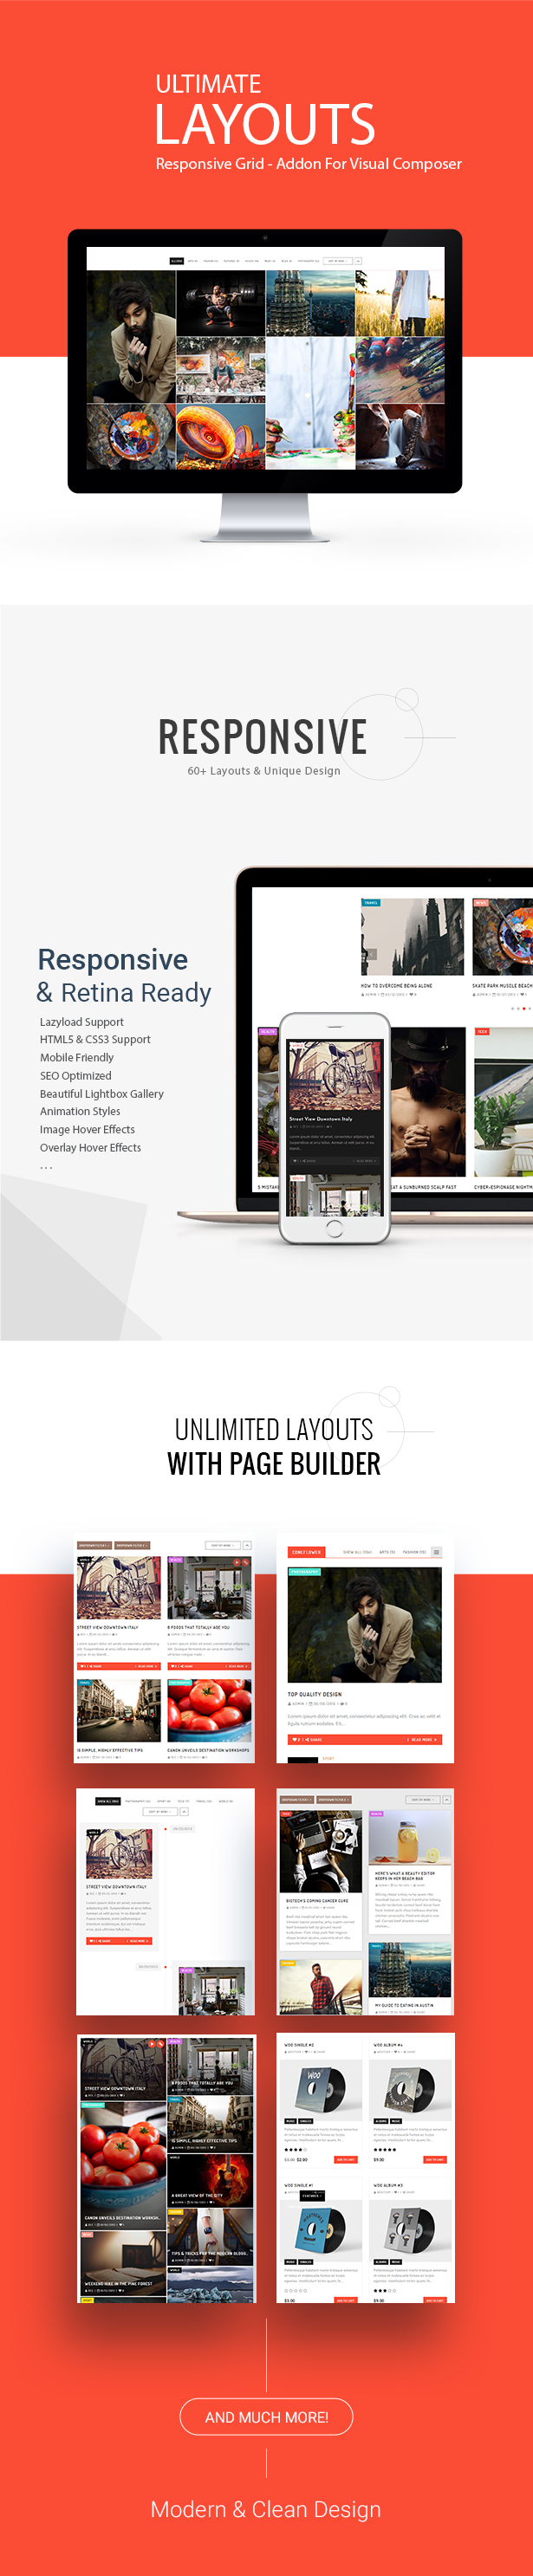 Ultimate Layouts - Responsive Grid & Youtube Video Gallery - Addon For WPBakery Page Builder - 2